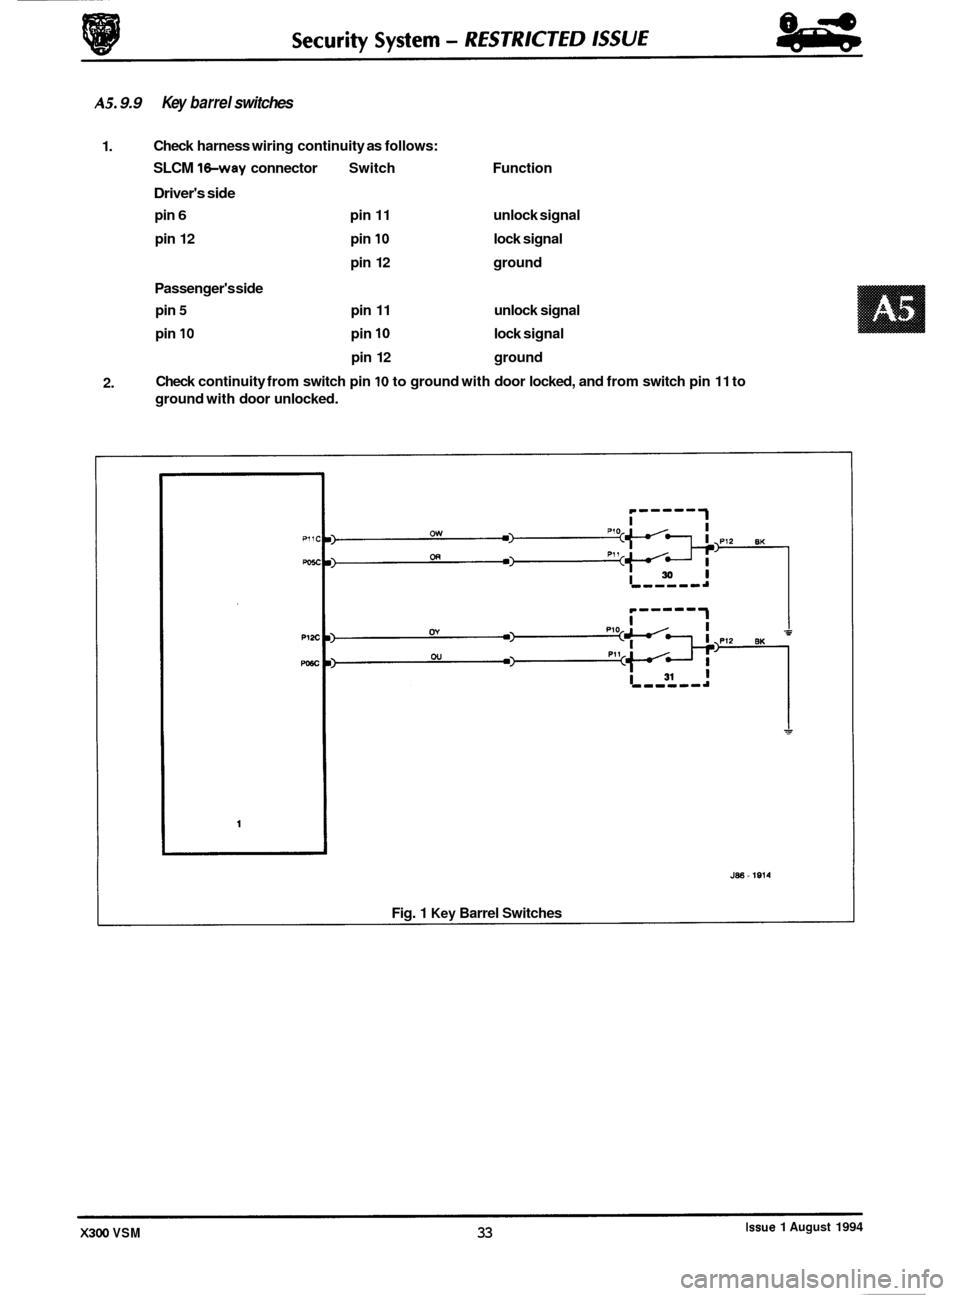 JAGUAR XJ6 1994 2.G Workshop Manual AS. 9.9 Key barrel switches 
1.  Check 
harness  wiring continuity  as follows: 
SLCM 1hay connector  Switch  Function 
Drivers side 
pin 6 pin 11 unlock signal 
pin  12  pin 
10 lock signal 
pin  12